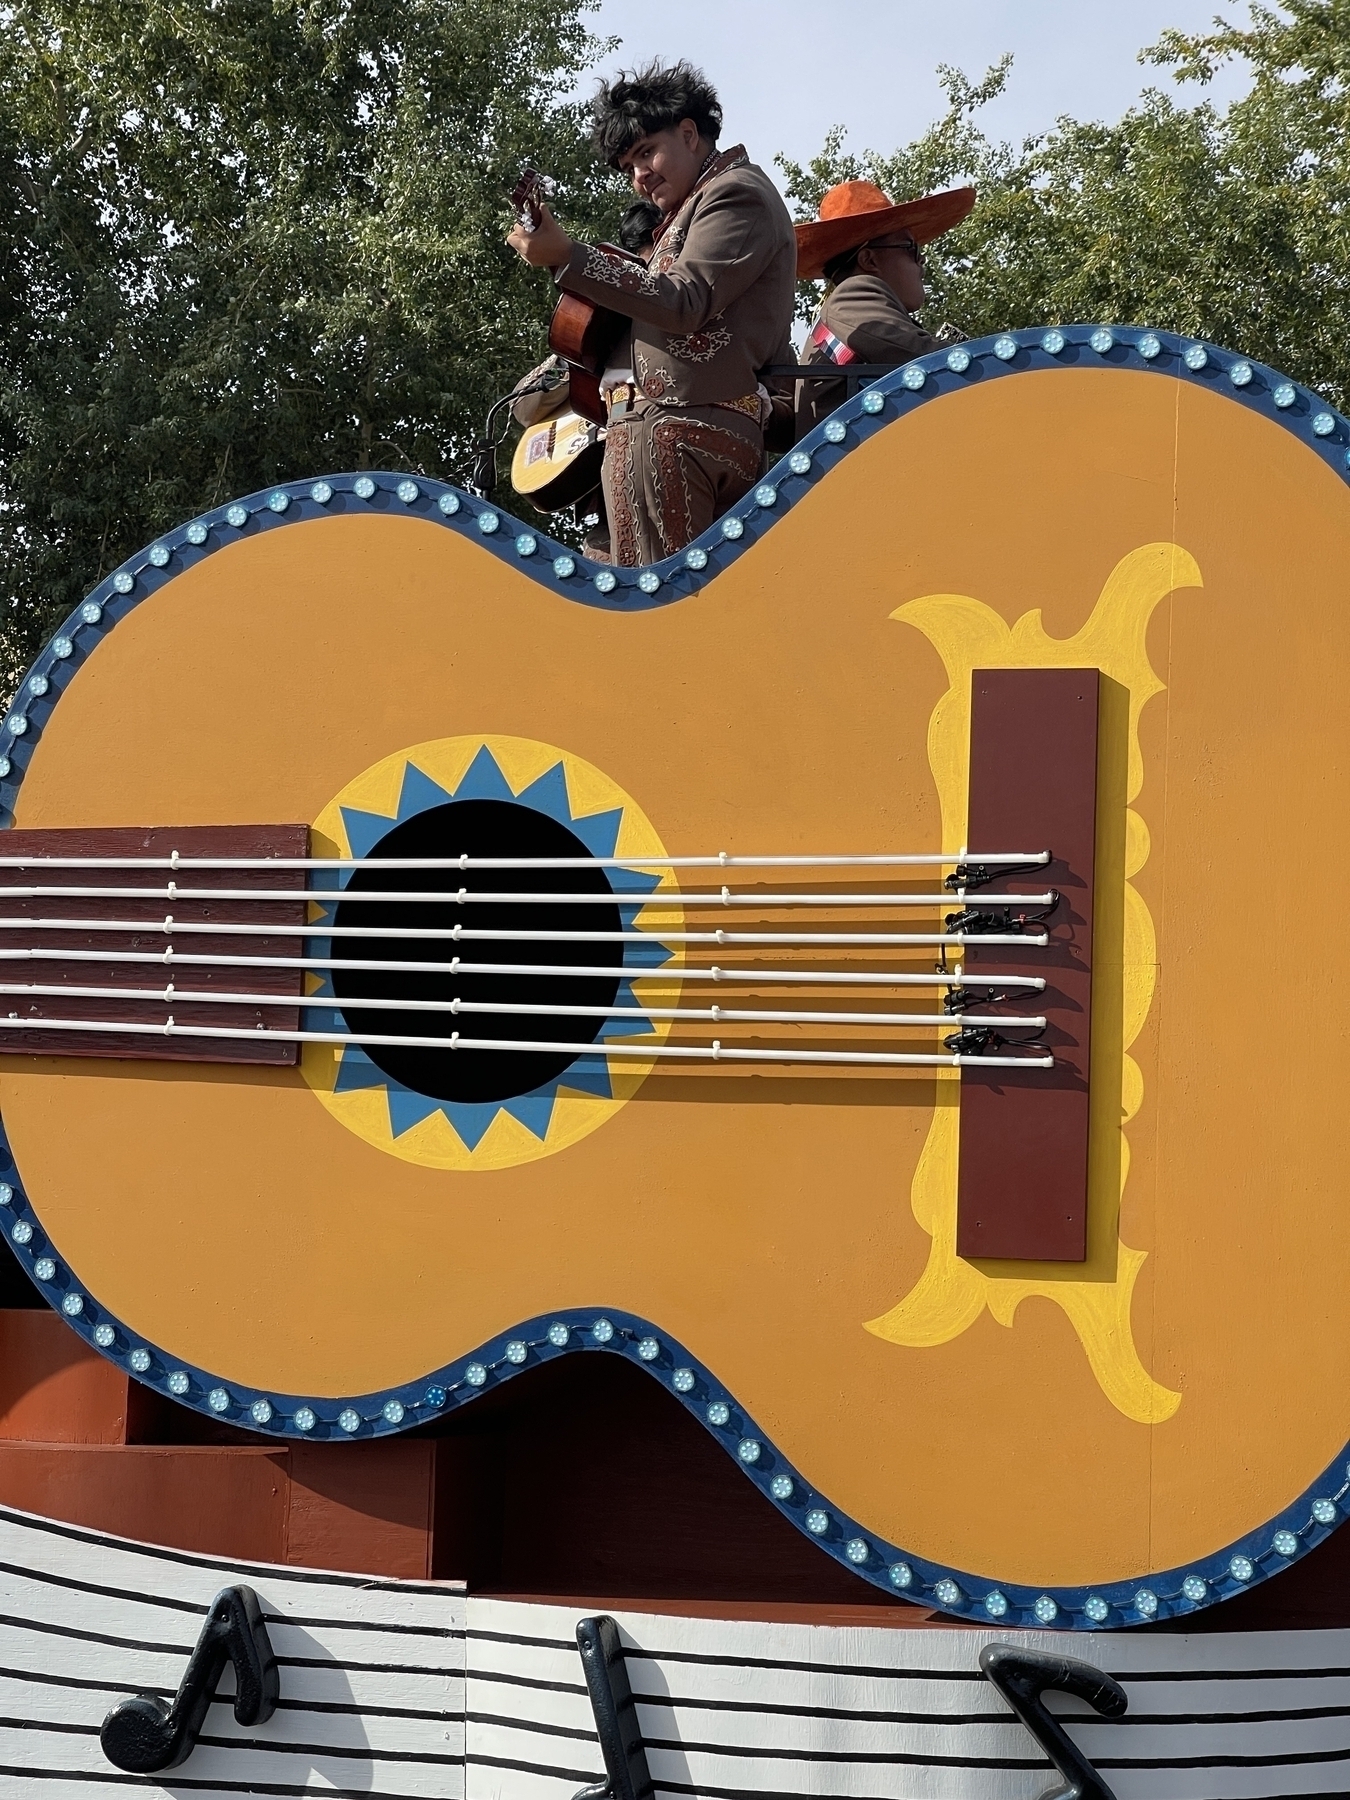 Mariachi playing a guitar on a giant guitar parade float